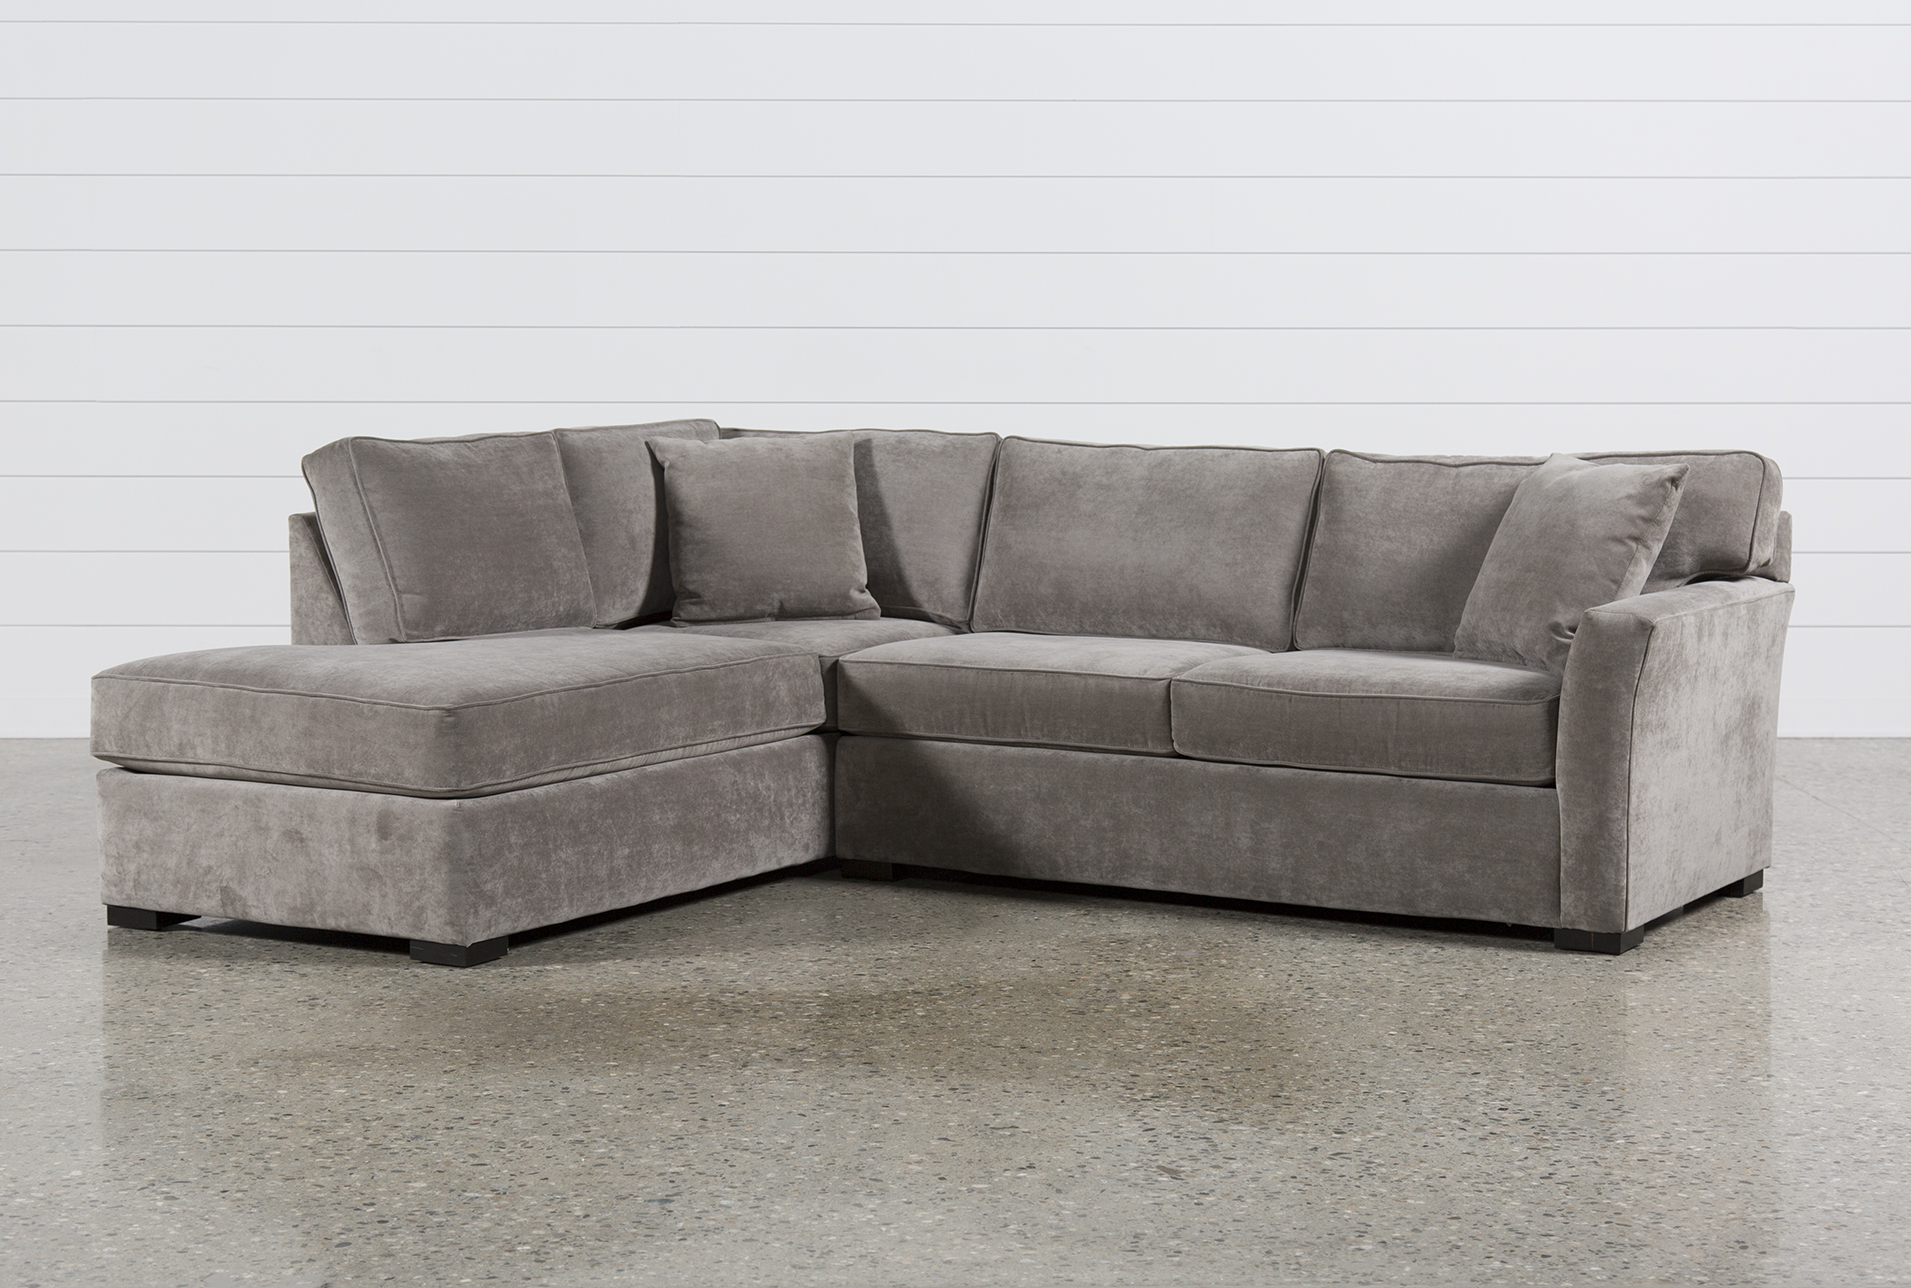 Aspen 2 Piece Sleeper Sectional W/Laf Chaise (Qty: 1) has been successfully  added to your Cart.